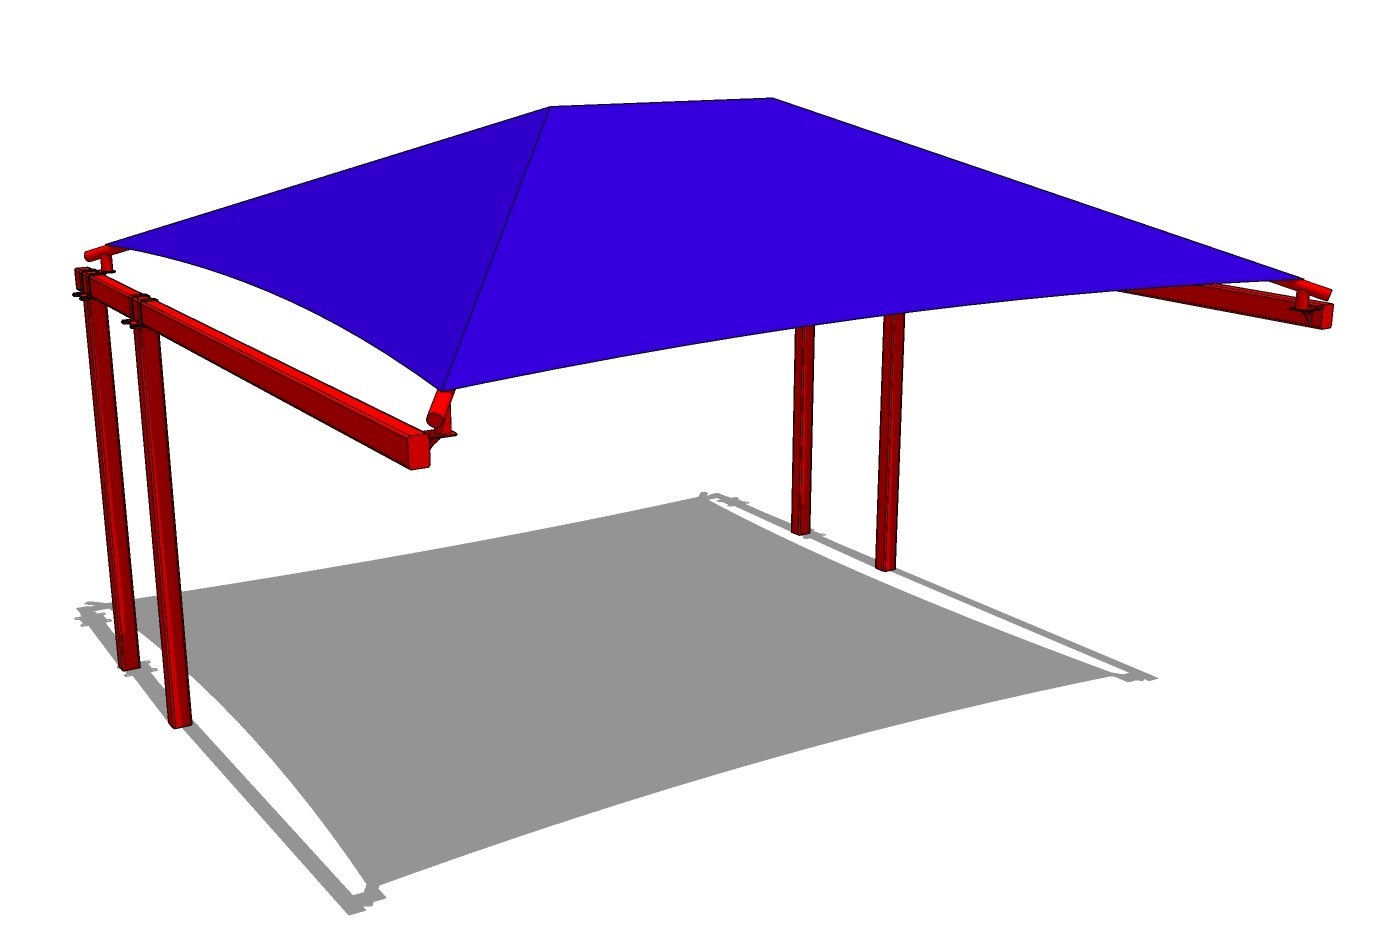 Fabric Structure: Double Column Hip Cantilever